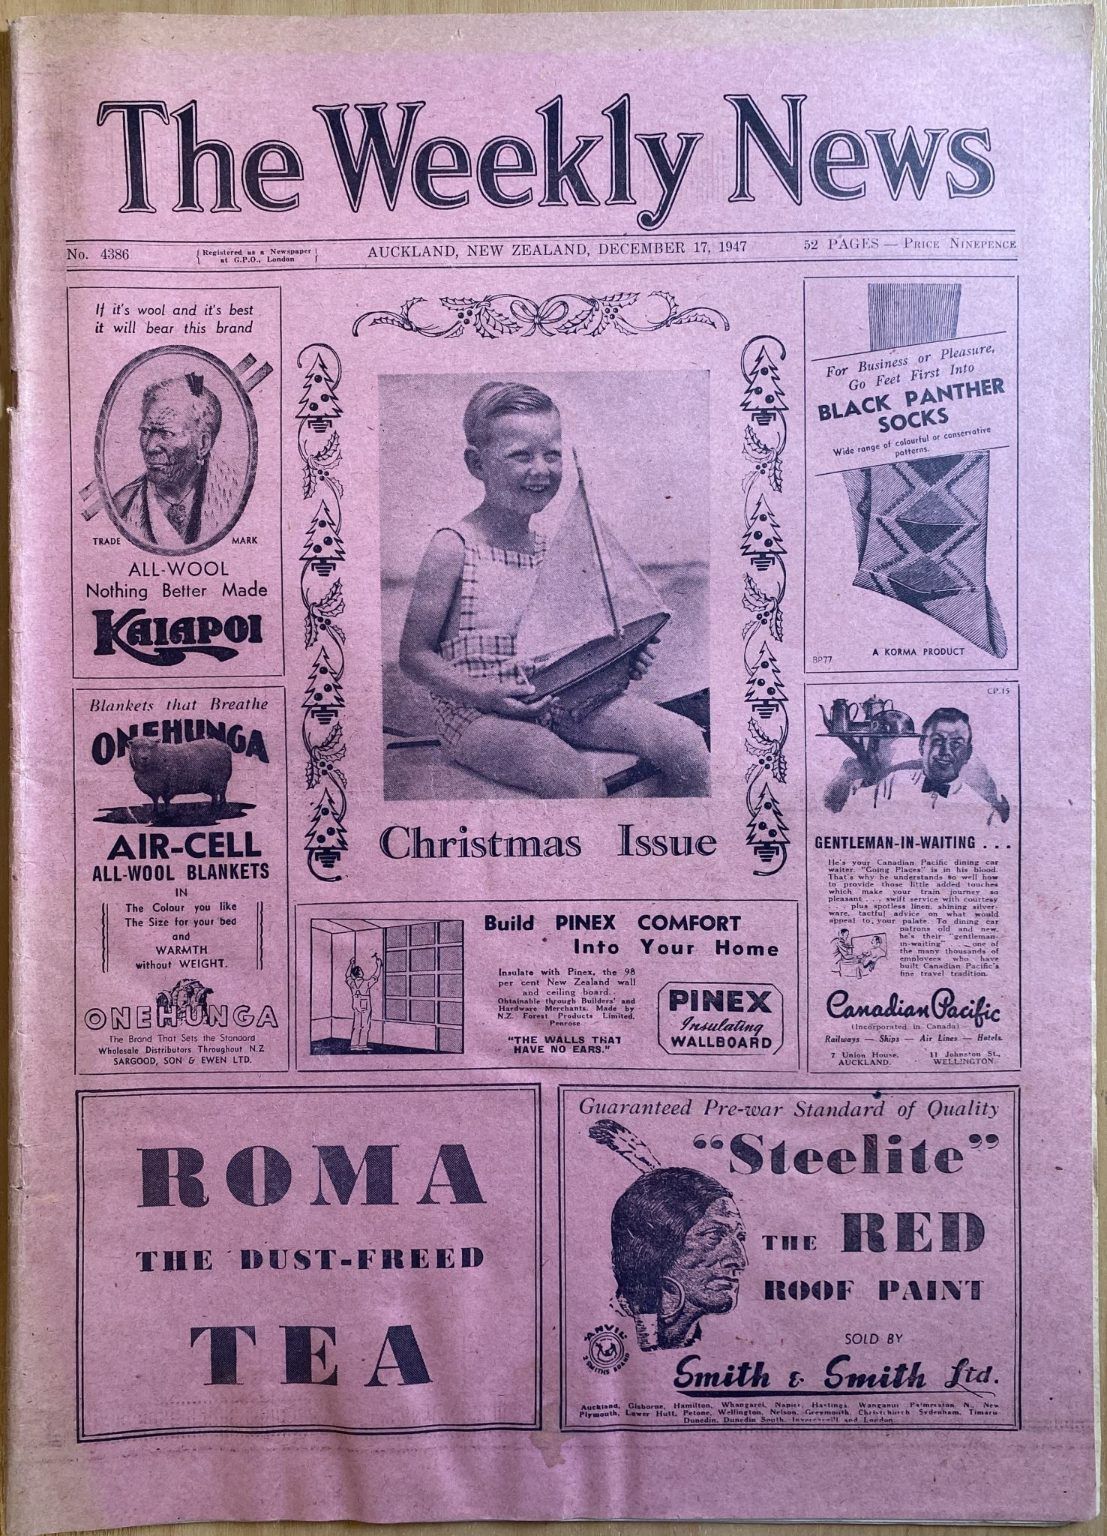 OLD NEWSPAPER: The Weekly News, No. 4386, 17 December 1947